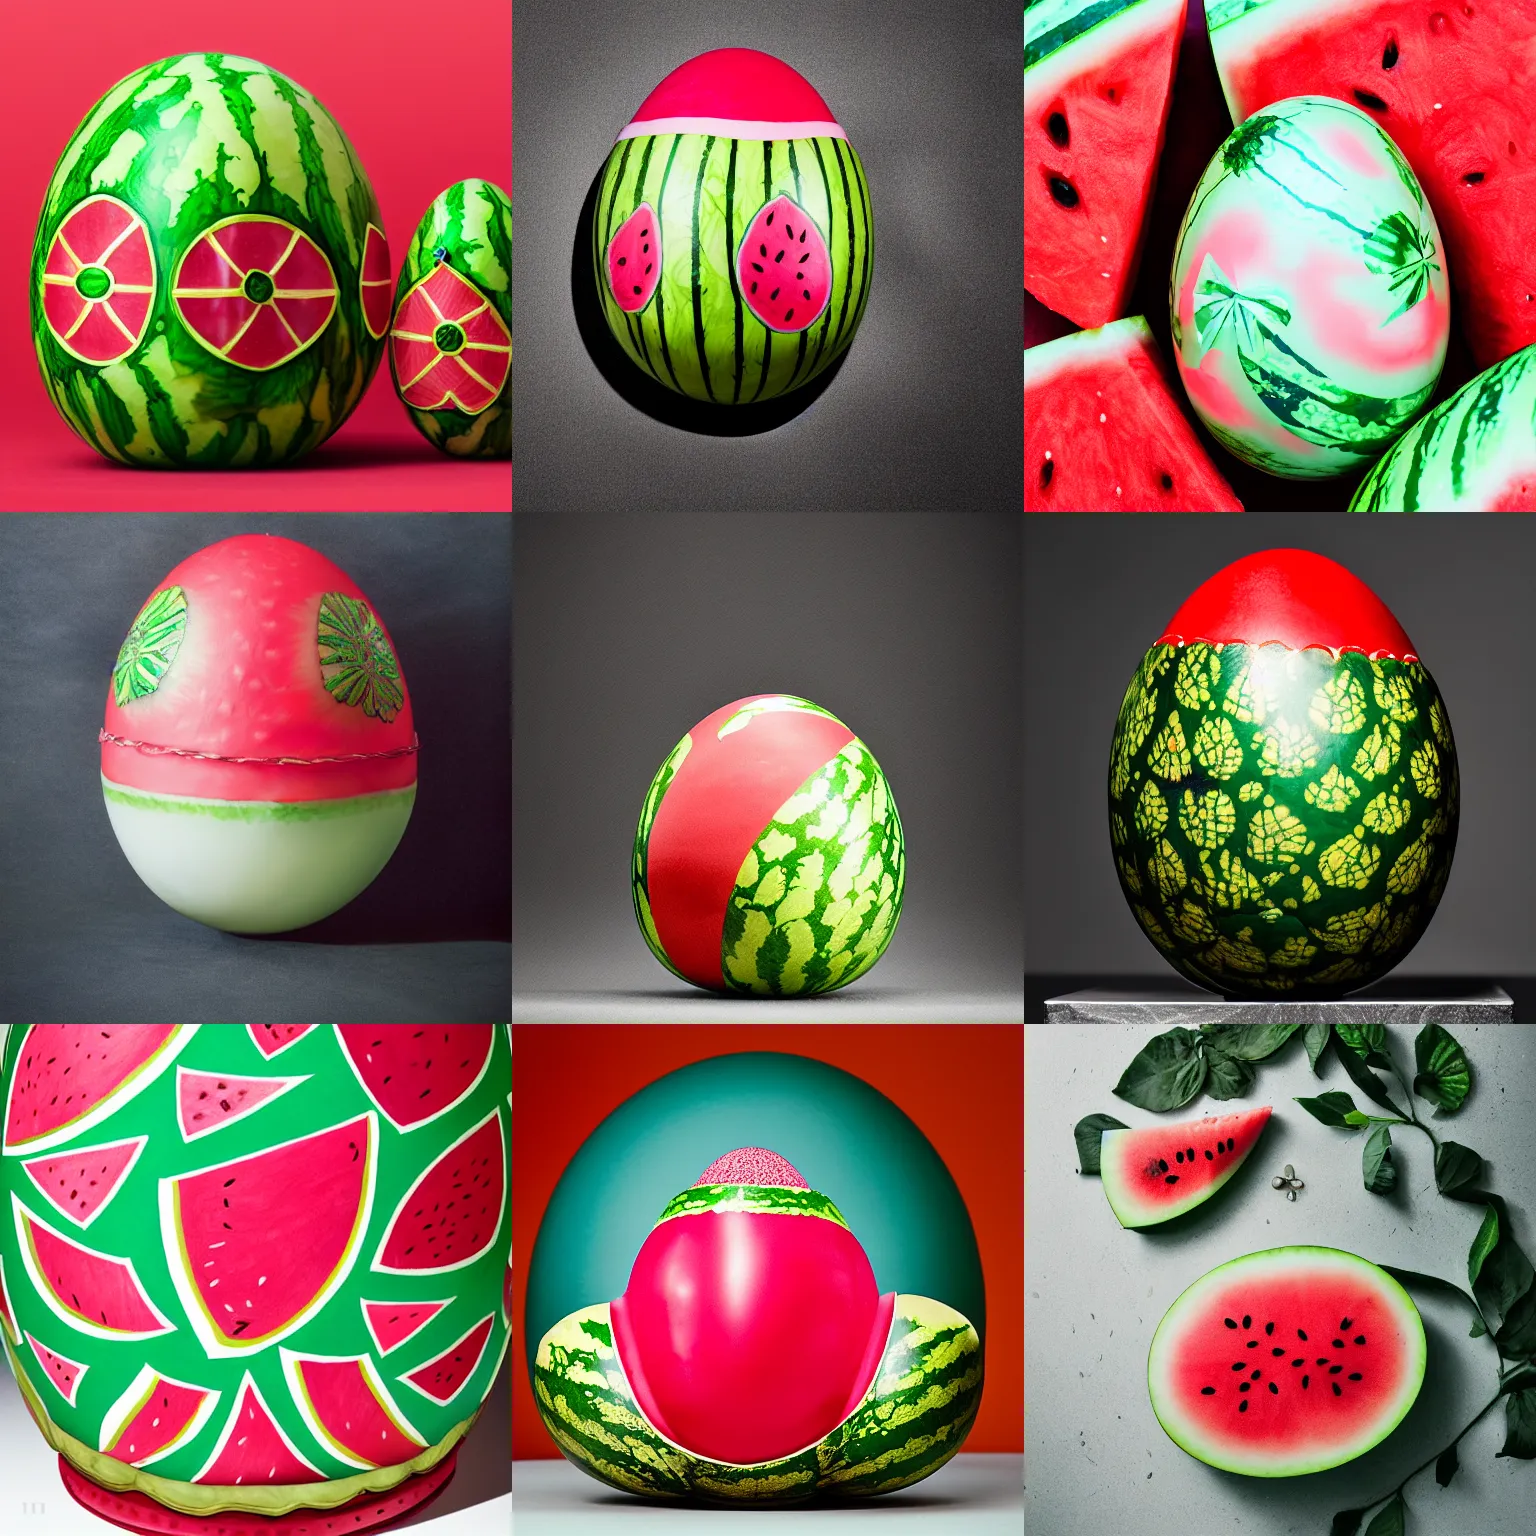 Prompt: a watermelon decorated like a faberge egg, studio photography